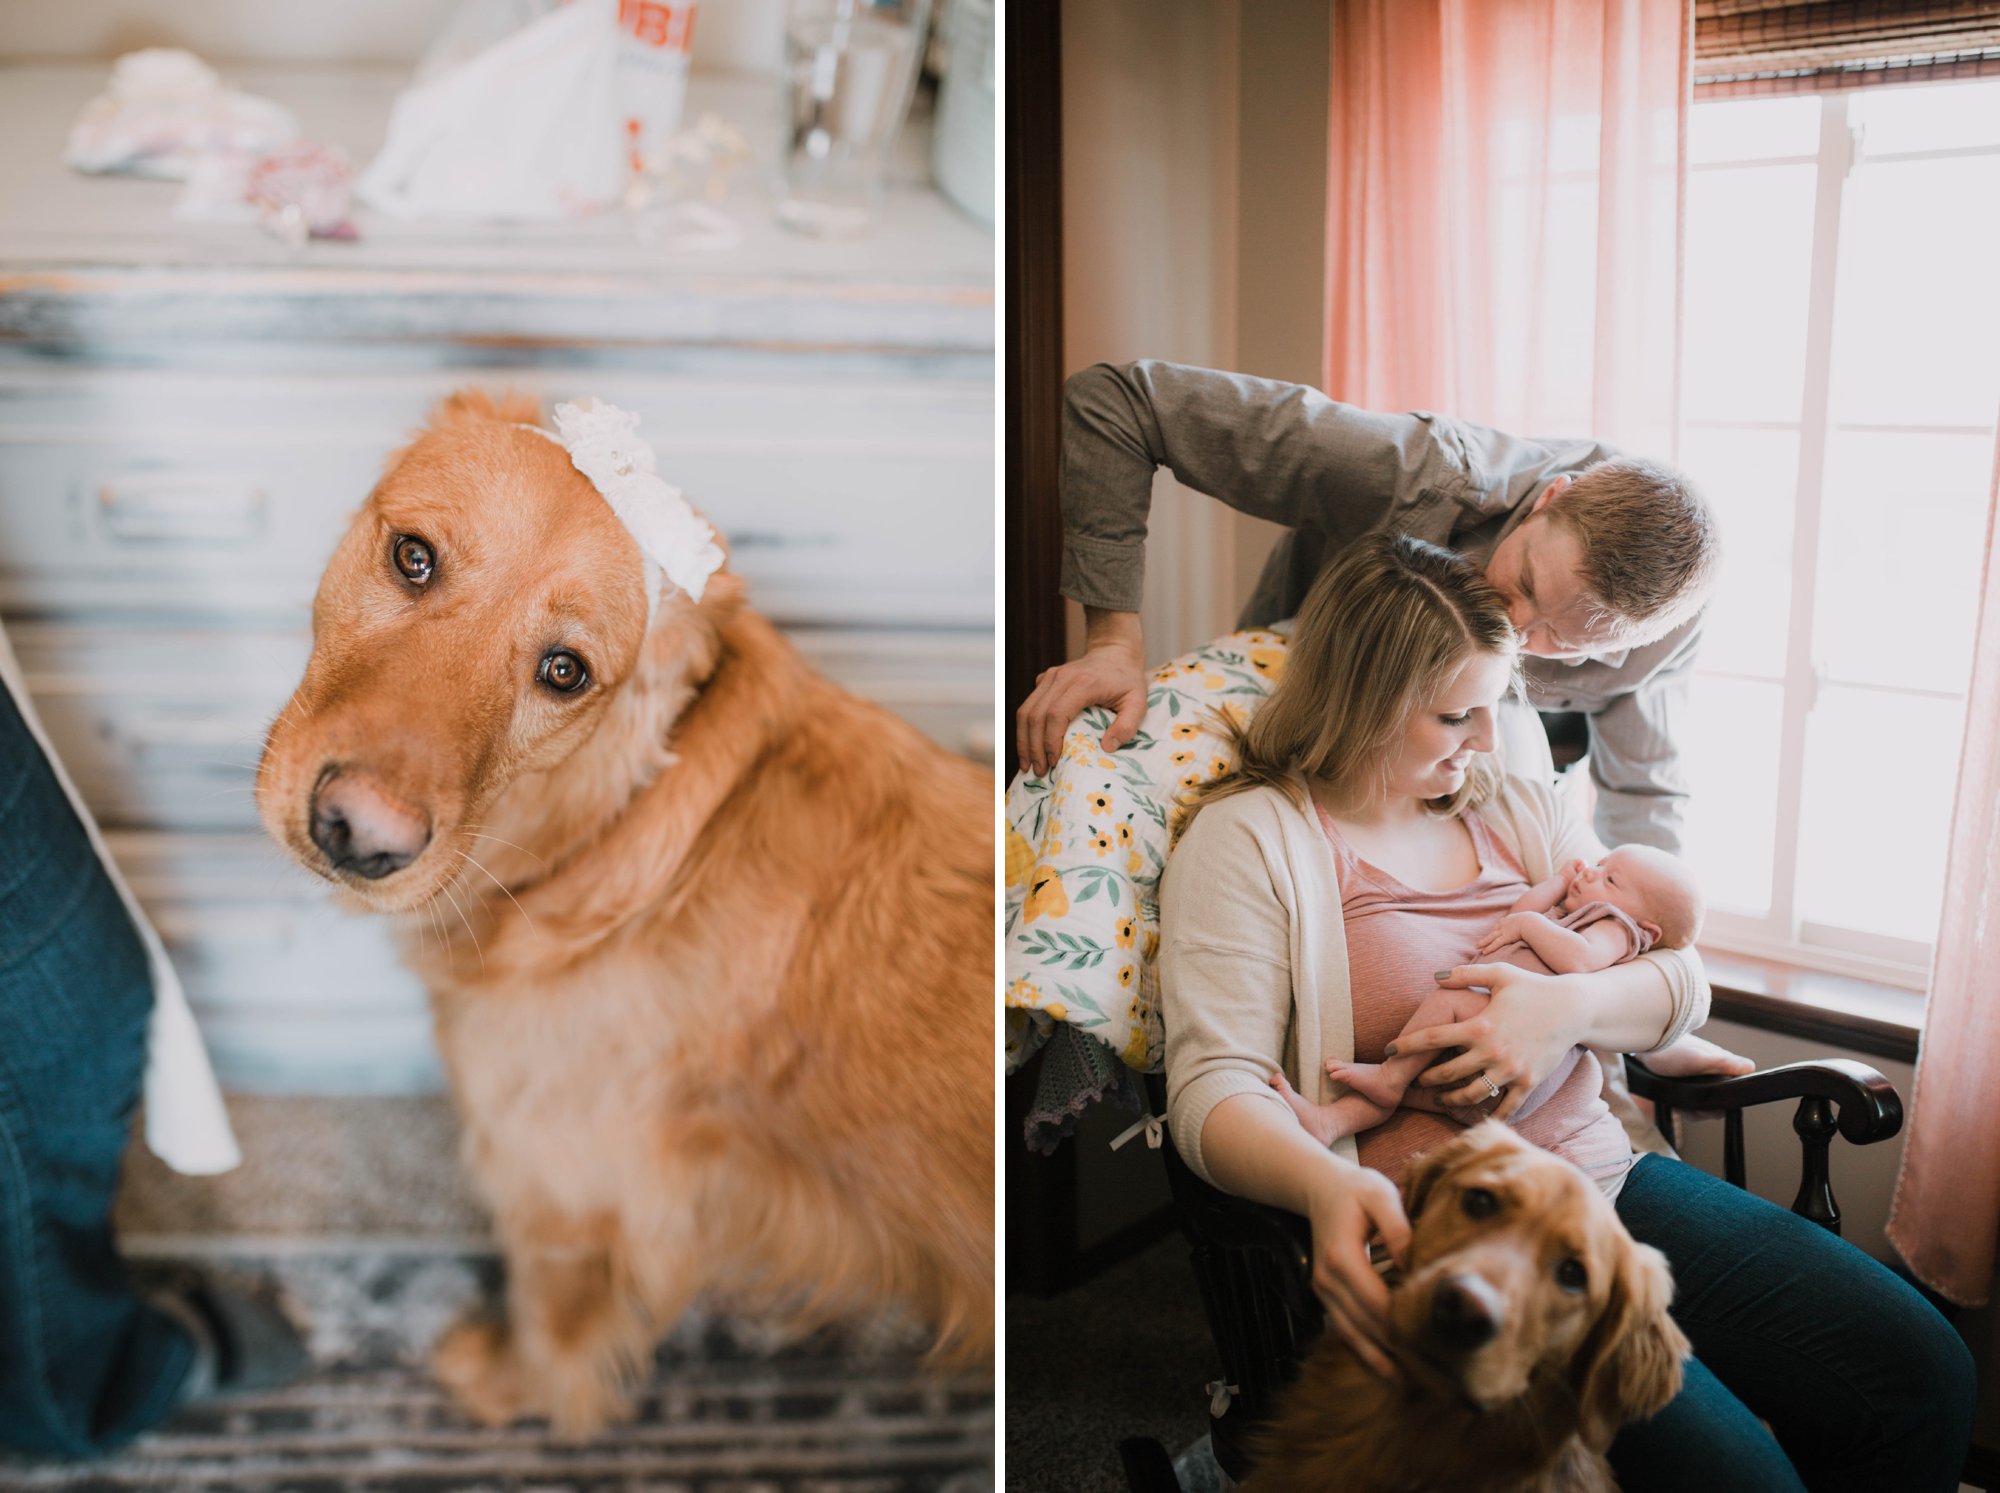 A newborn with her family and dog.